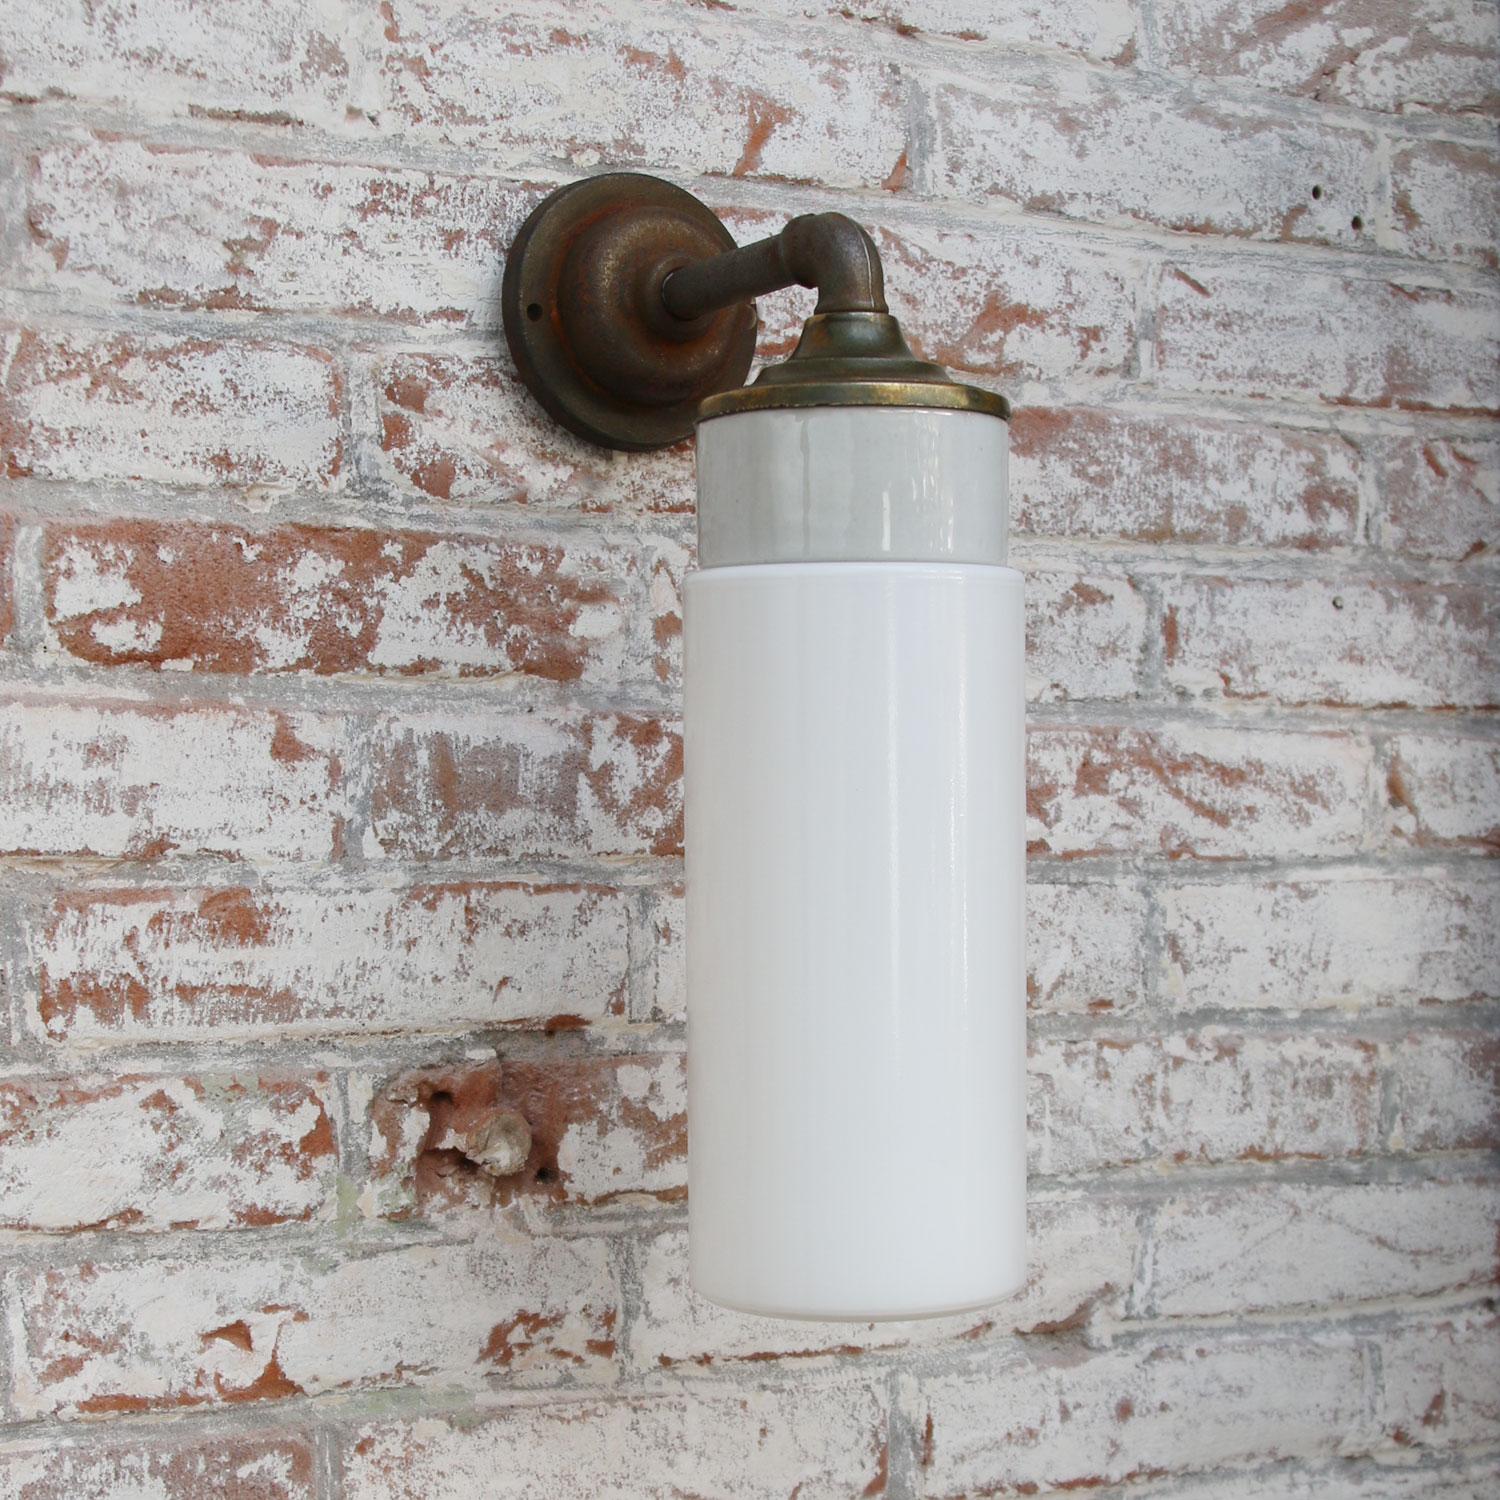 Porcelain Industrial wall lamp.
White porcelain, brass and cast iron
Opaline milk glass.
2 conductors, no ground.

Diameter cast iron wall piece 10 cm. 2 holes to secure.

Weight: 2.10 kg / 4.6 lb

Priced per individual item. All lamps have been